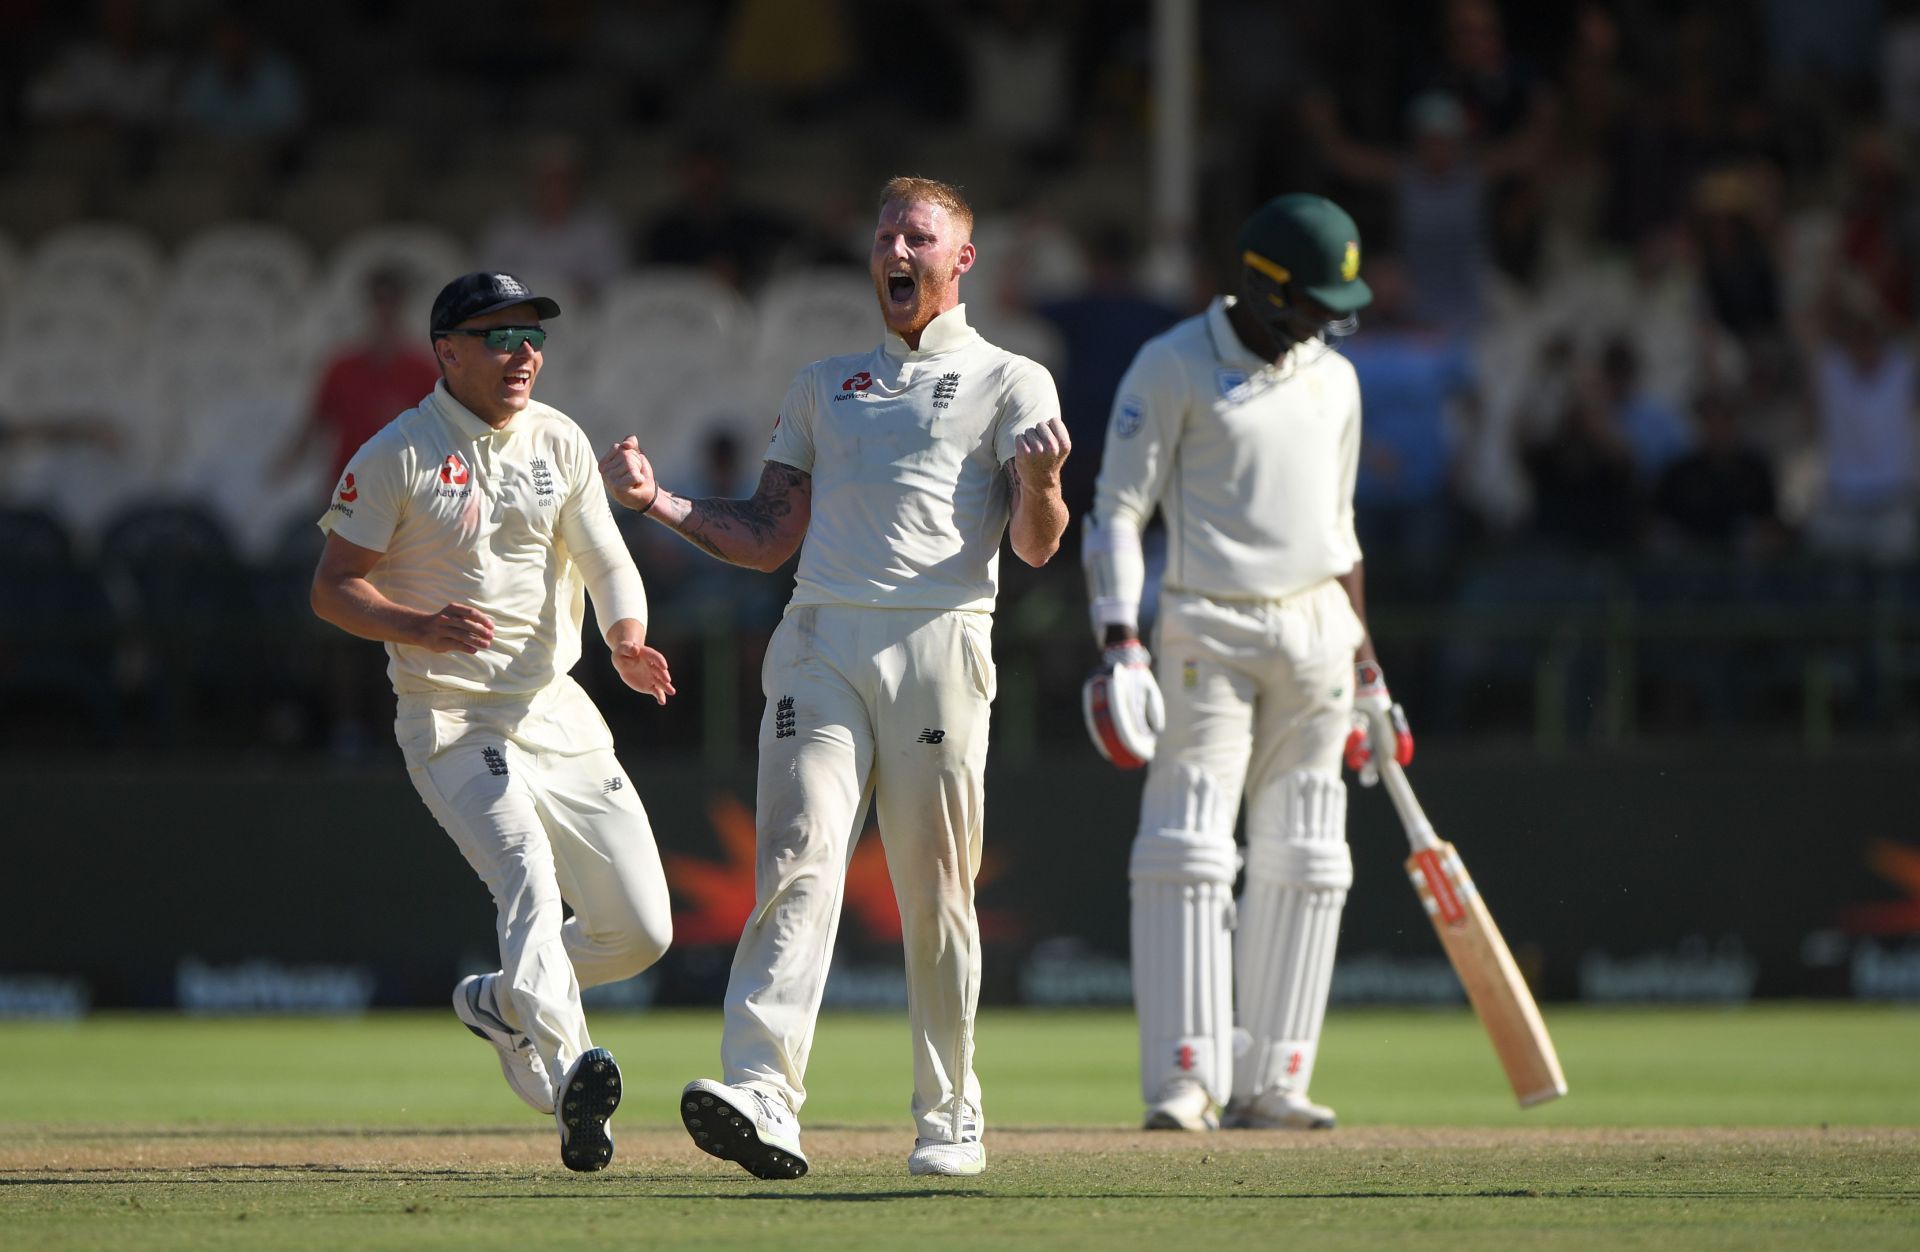 England beat South Africa by 189 runs in the previous Test at Newlands